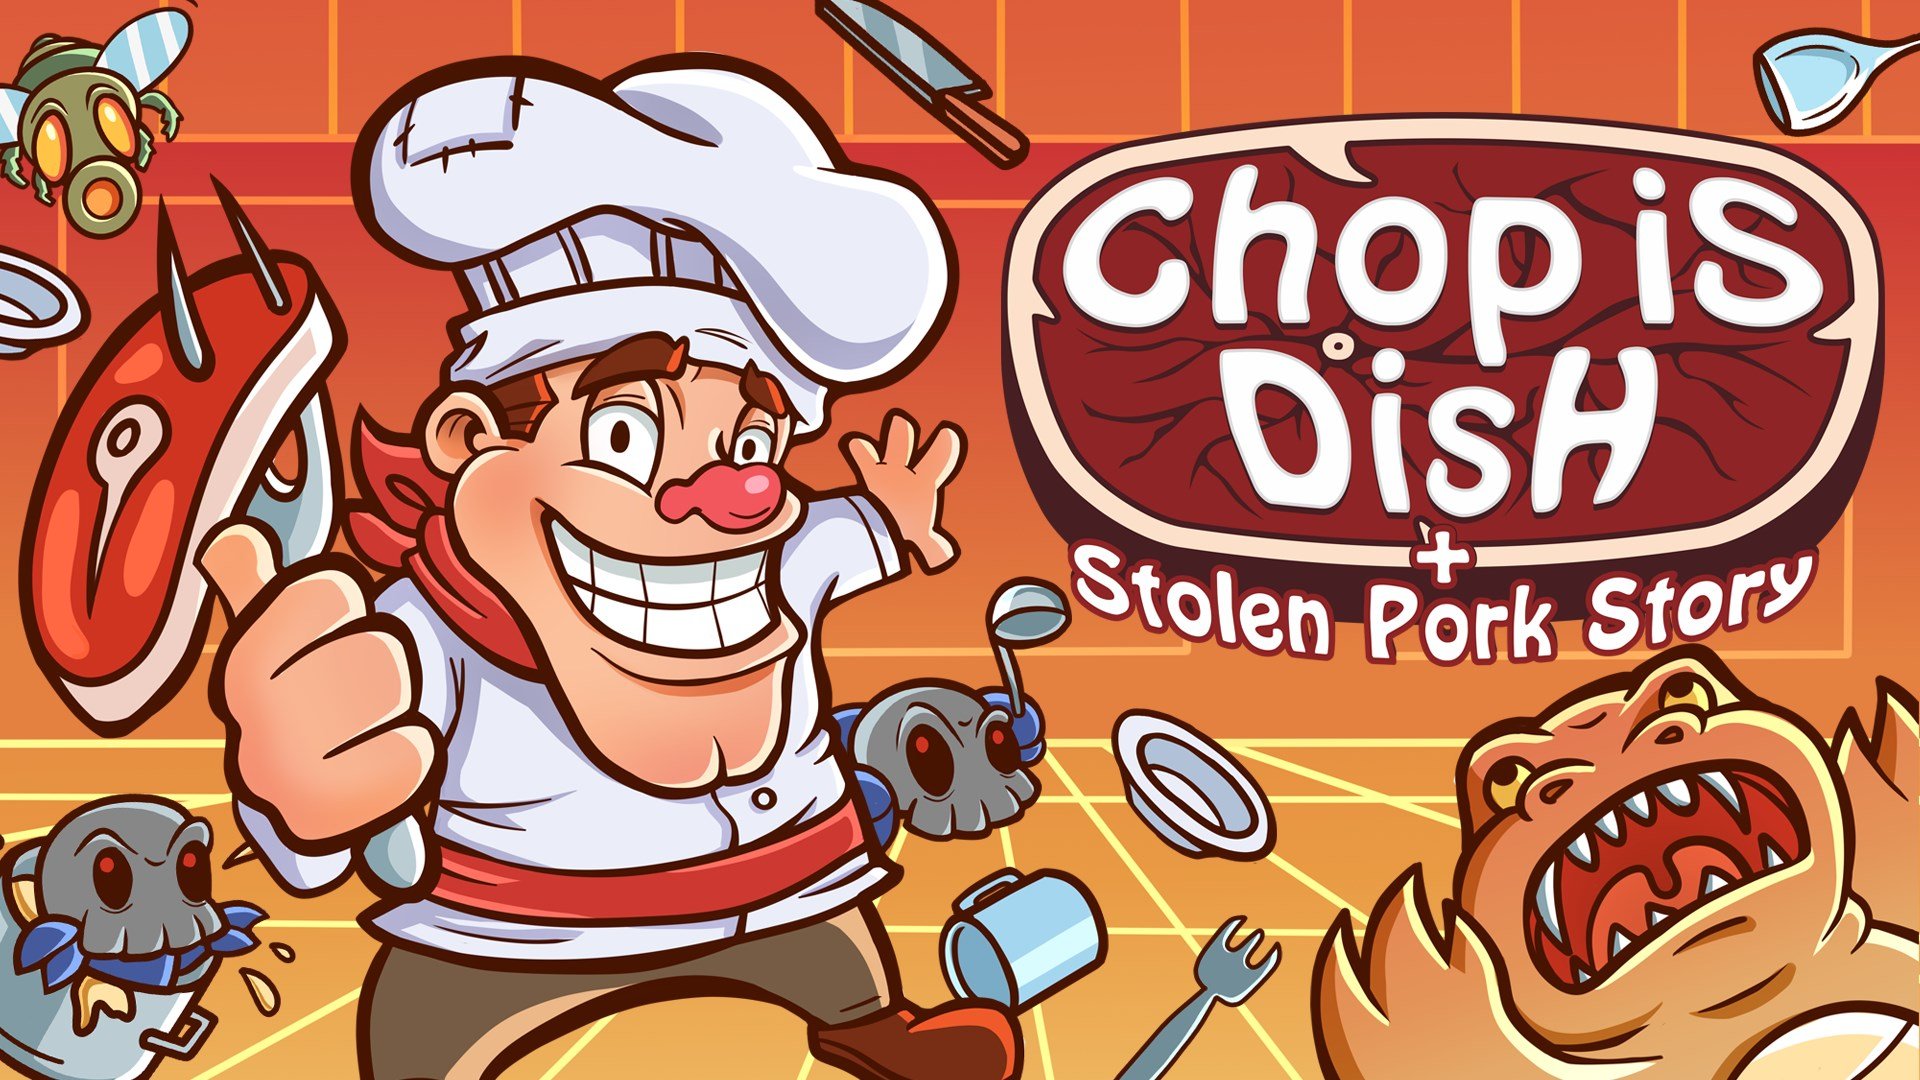 Chop is Dish cover image